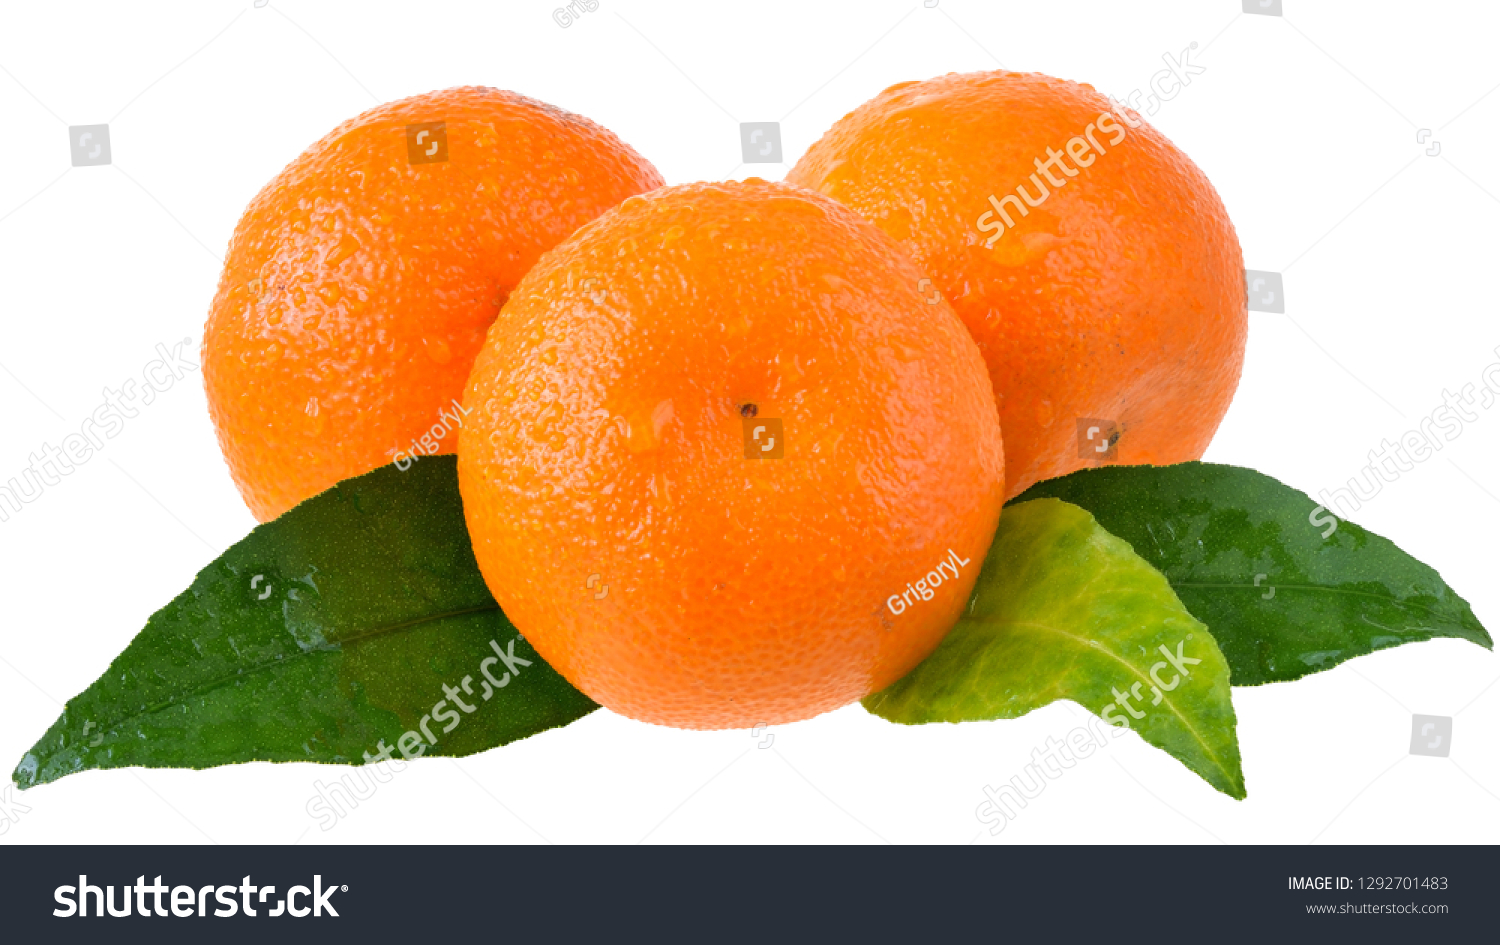 tangerine with leaf isolated on white background #1292701483